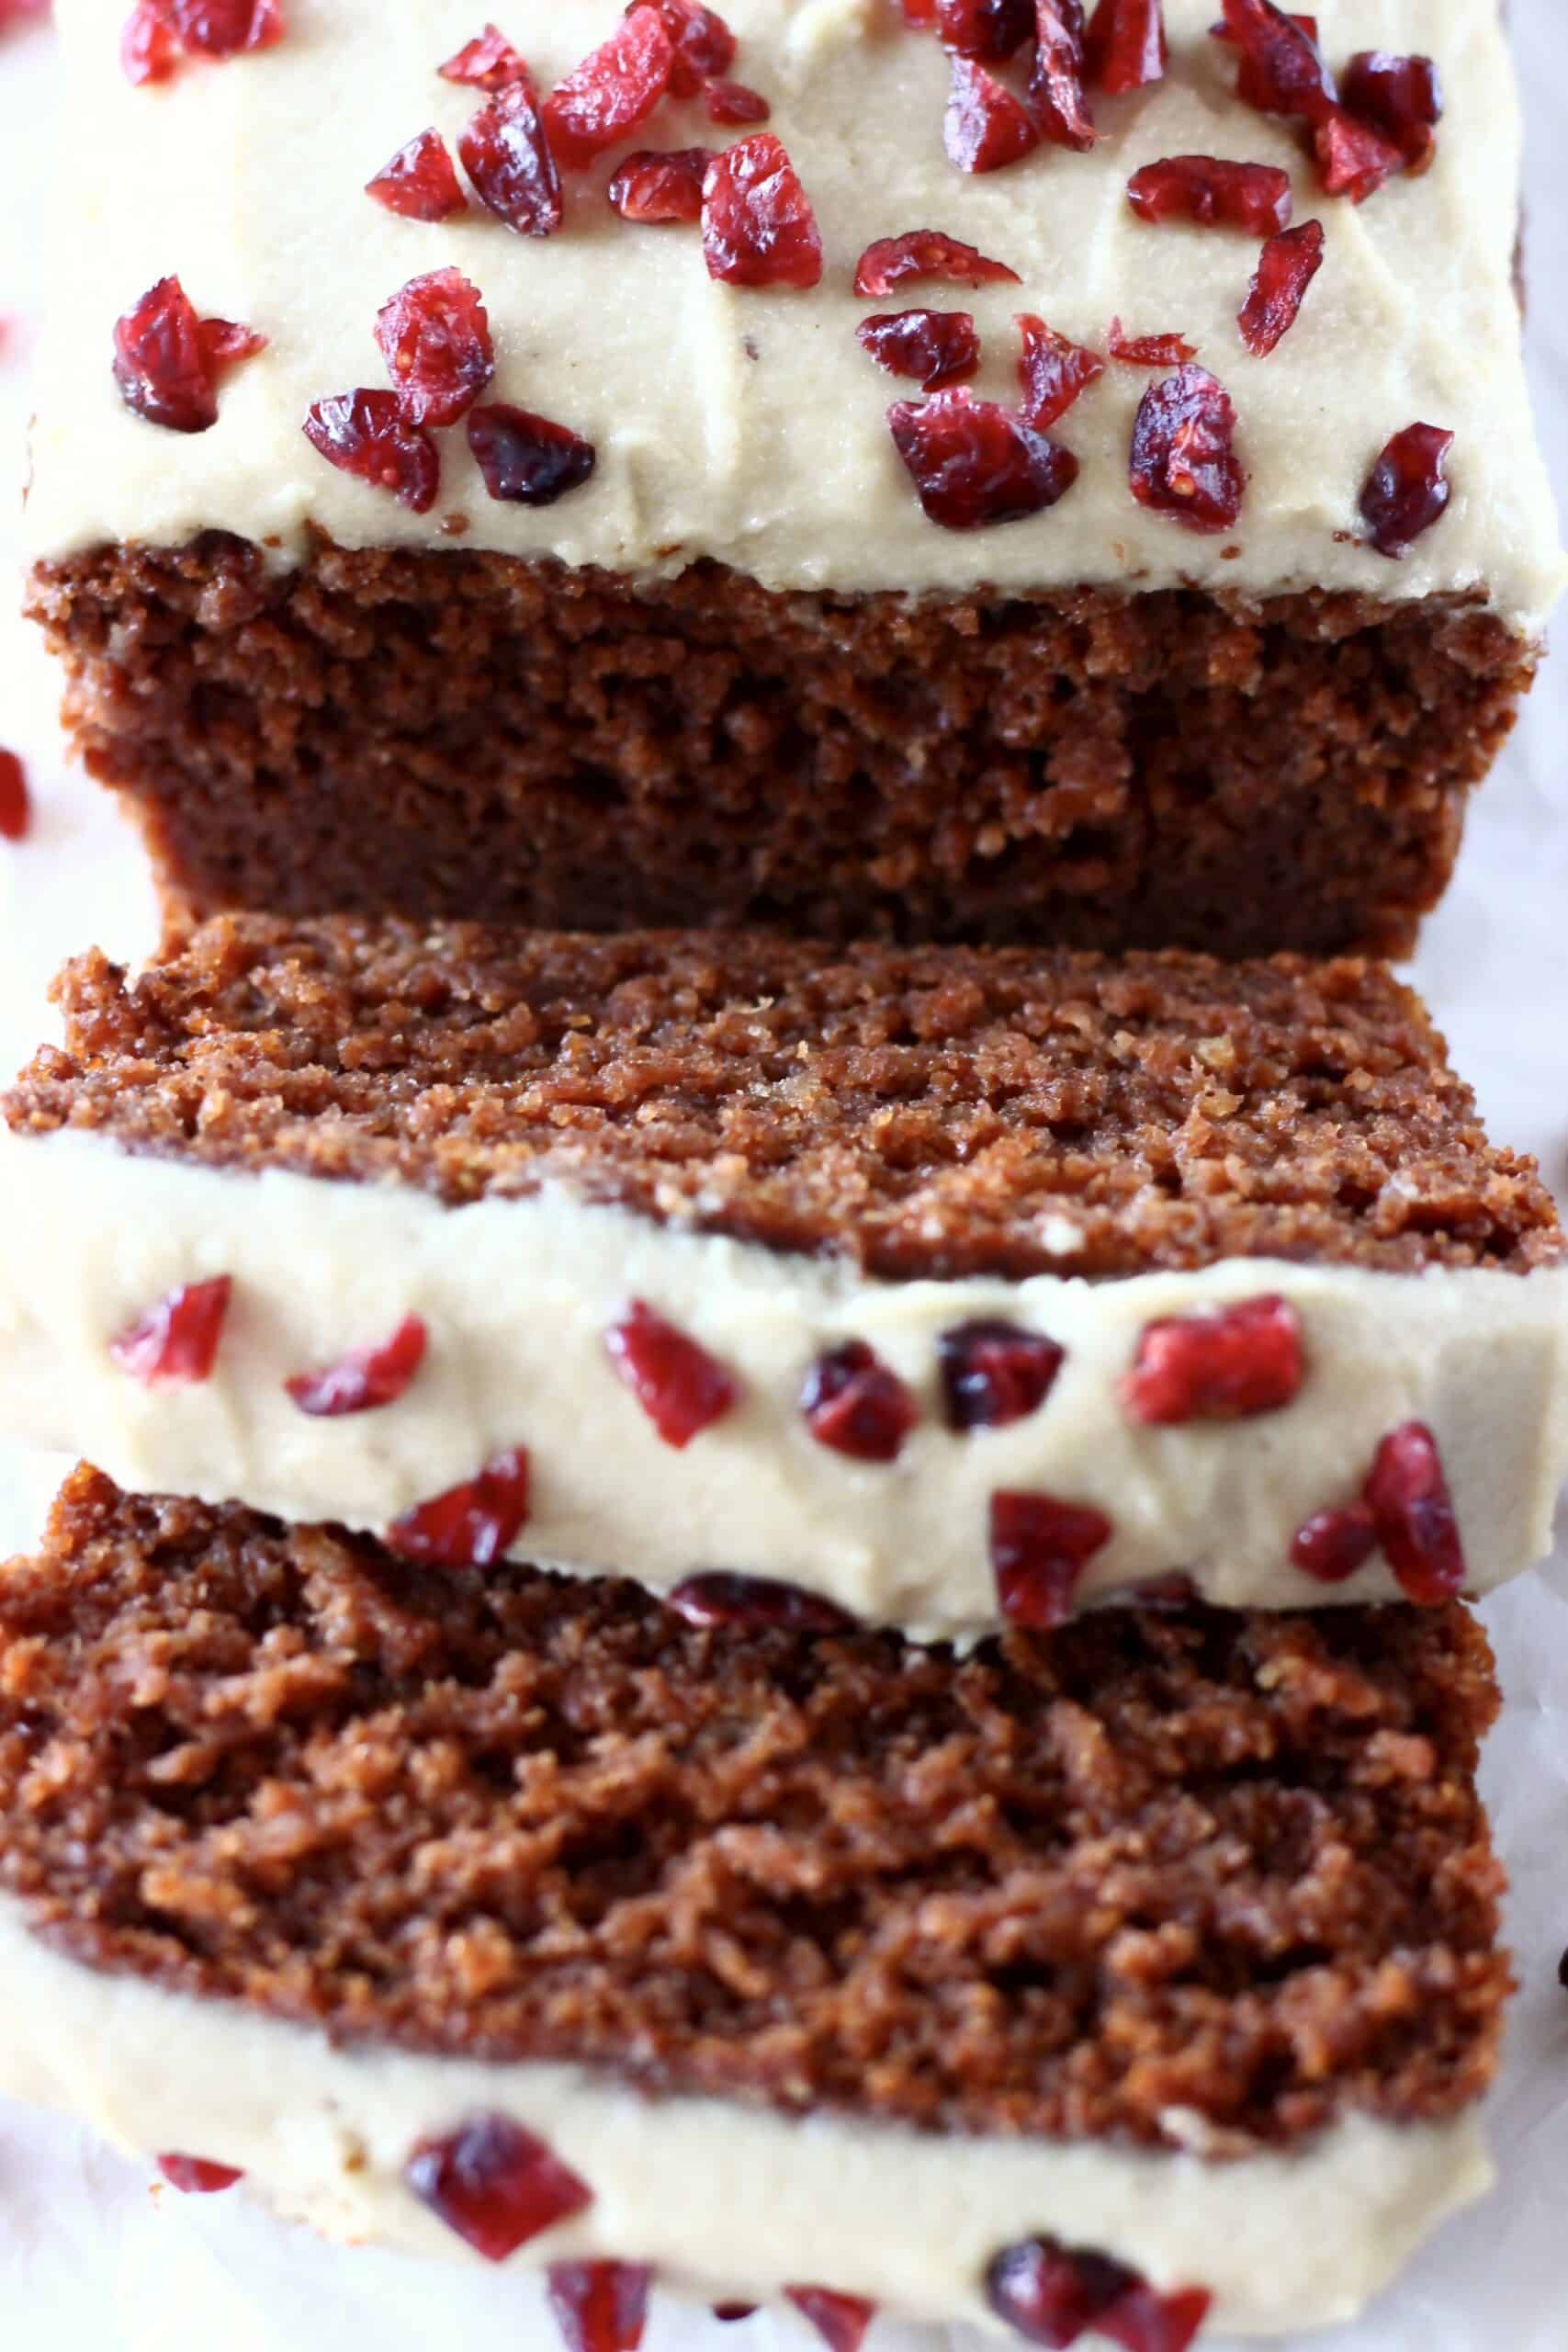 Gingerbread loaf cake topped with white frosting and dried cranberries with two slices next to it